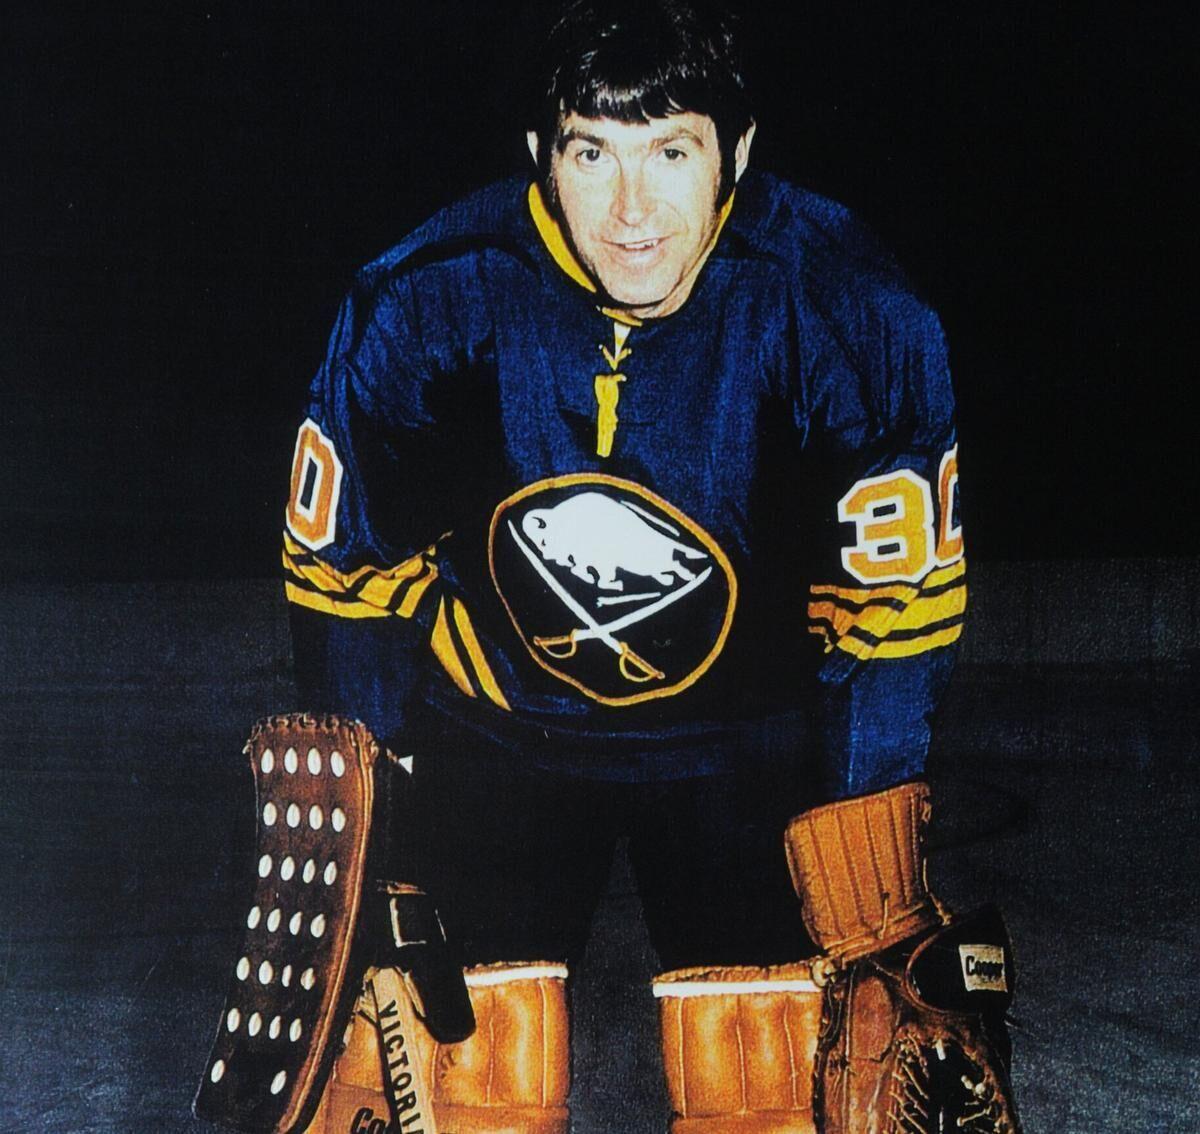 Obituary: NHL/WHA goalie Dave Dryden was 'one of the nicest